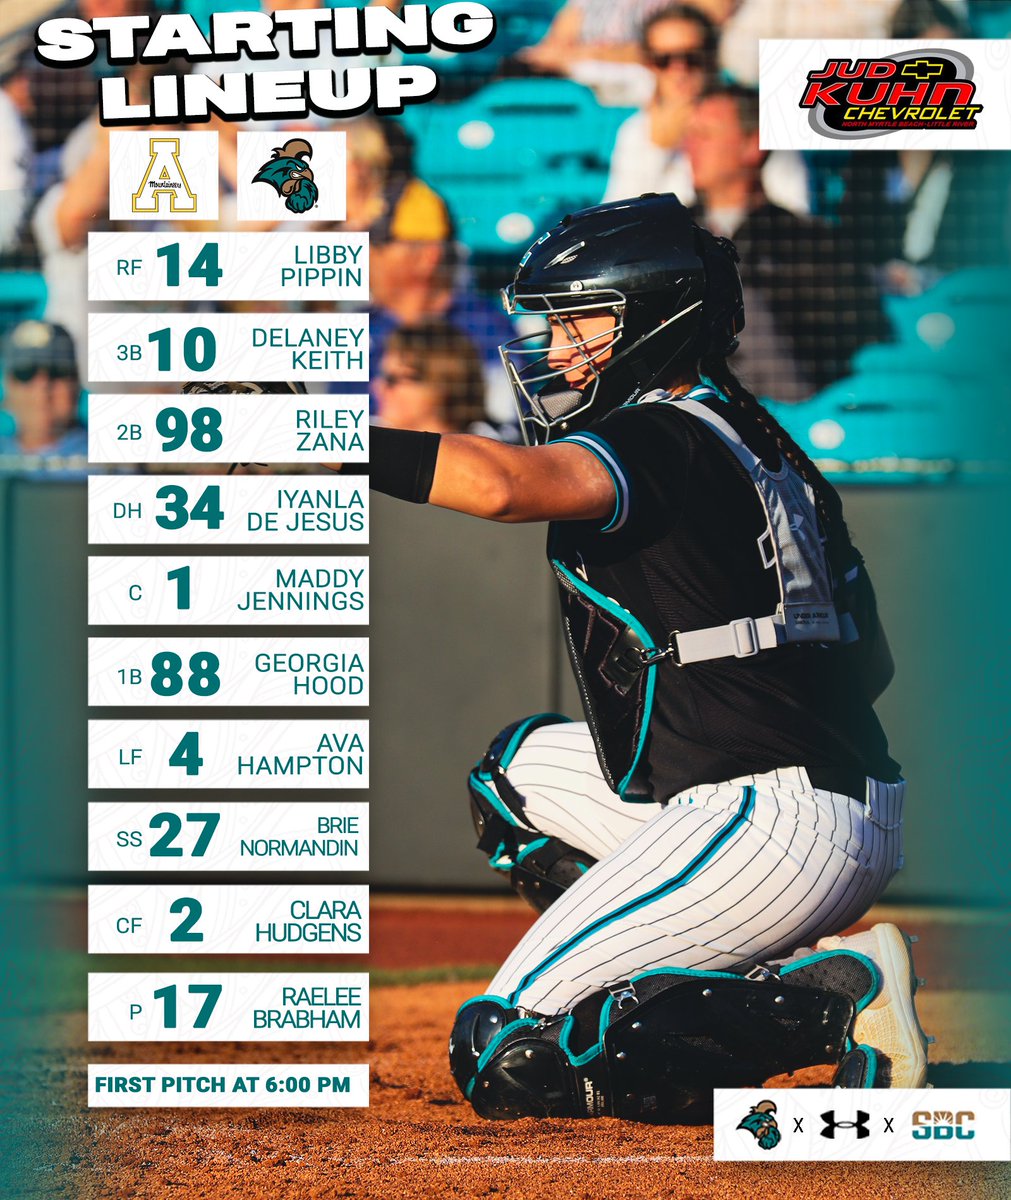 The starters for our Friday game against App State! #TEALNATION #ChantsUp